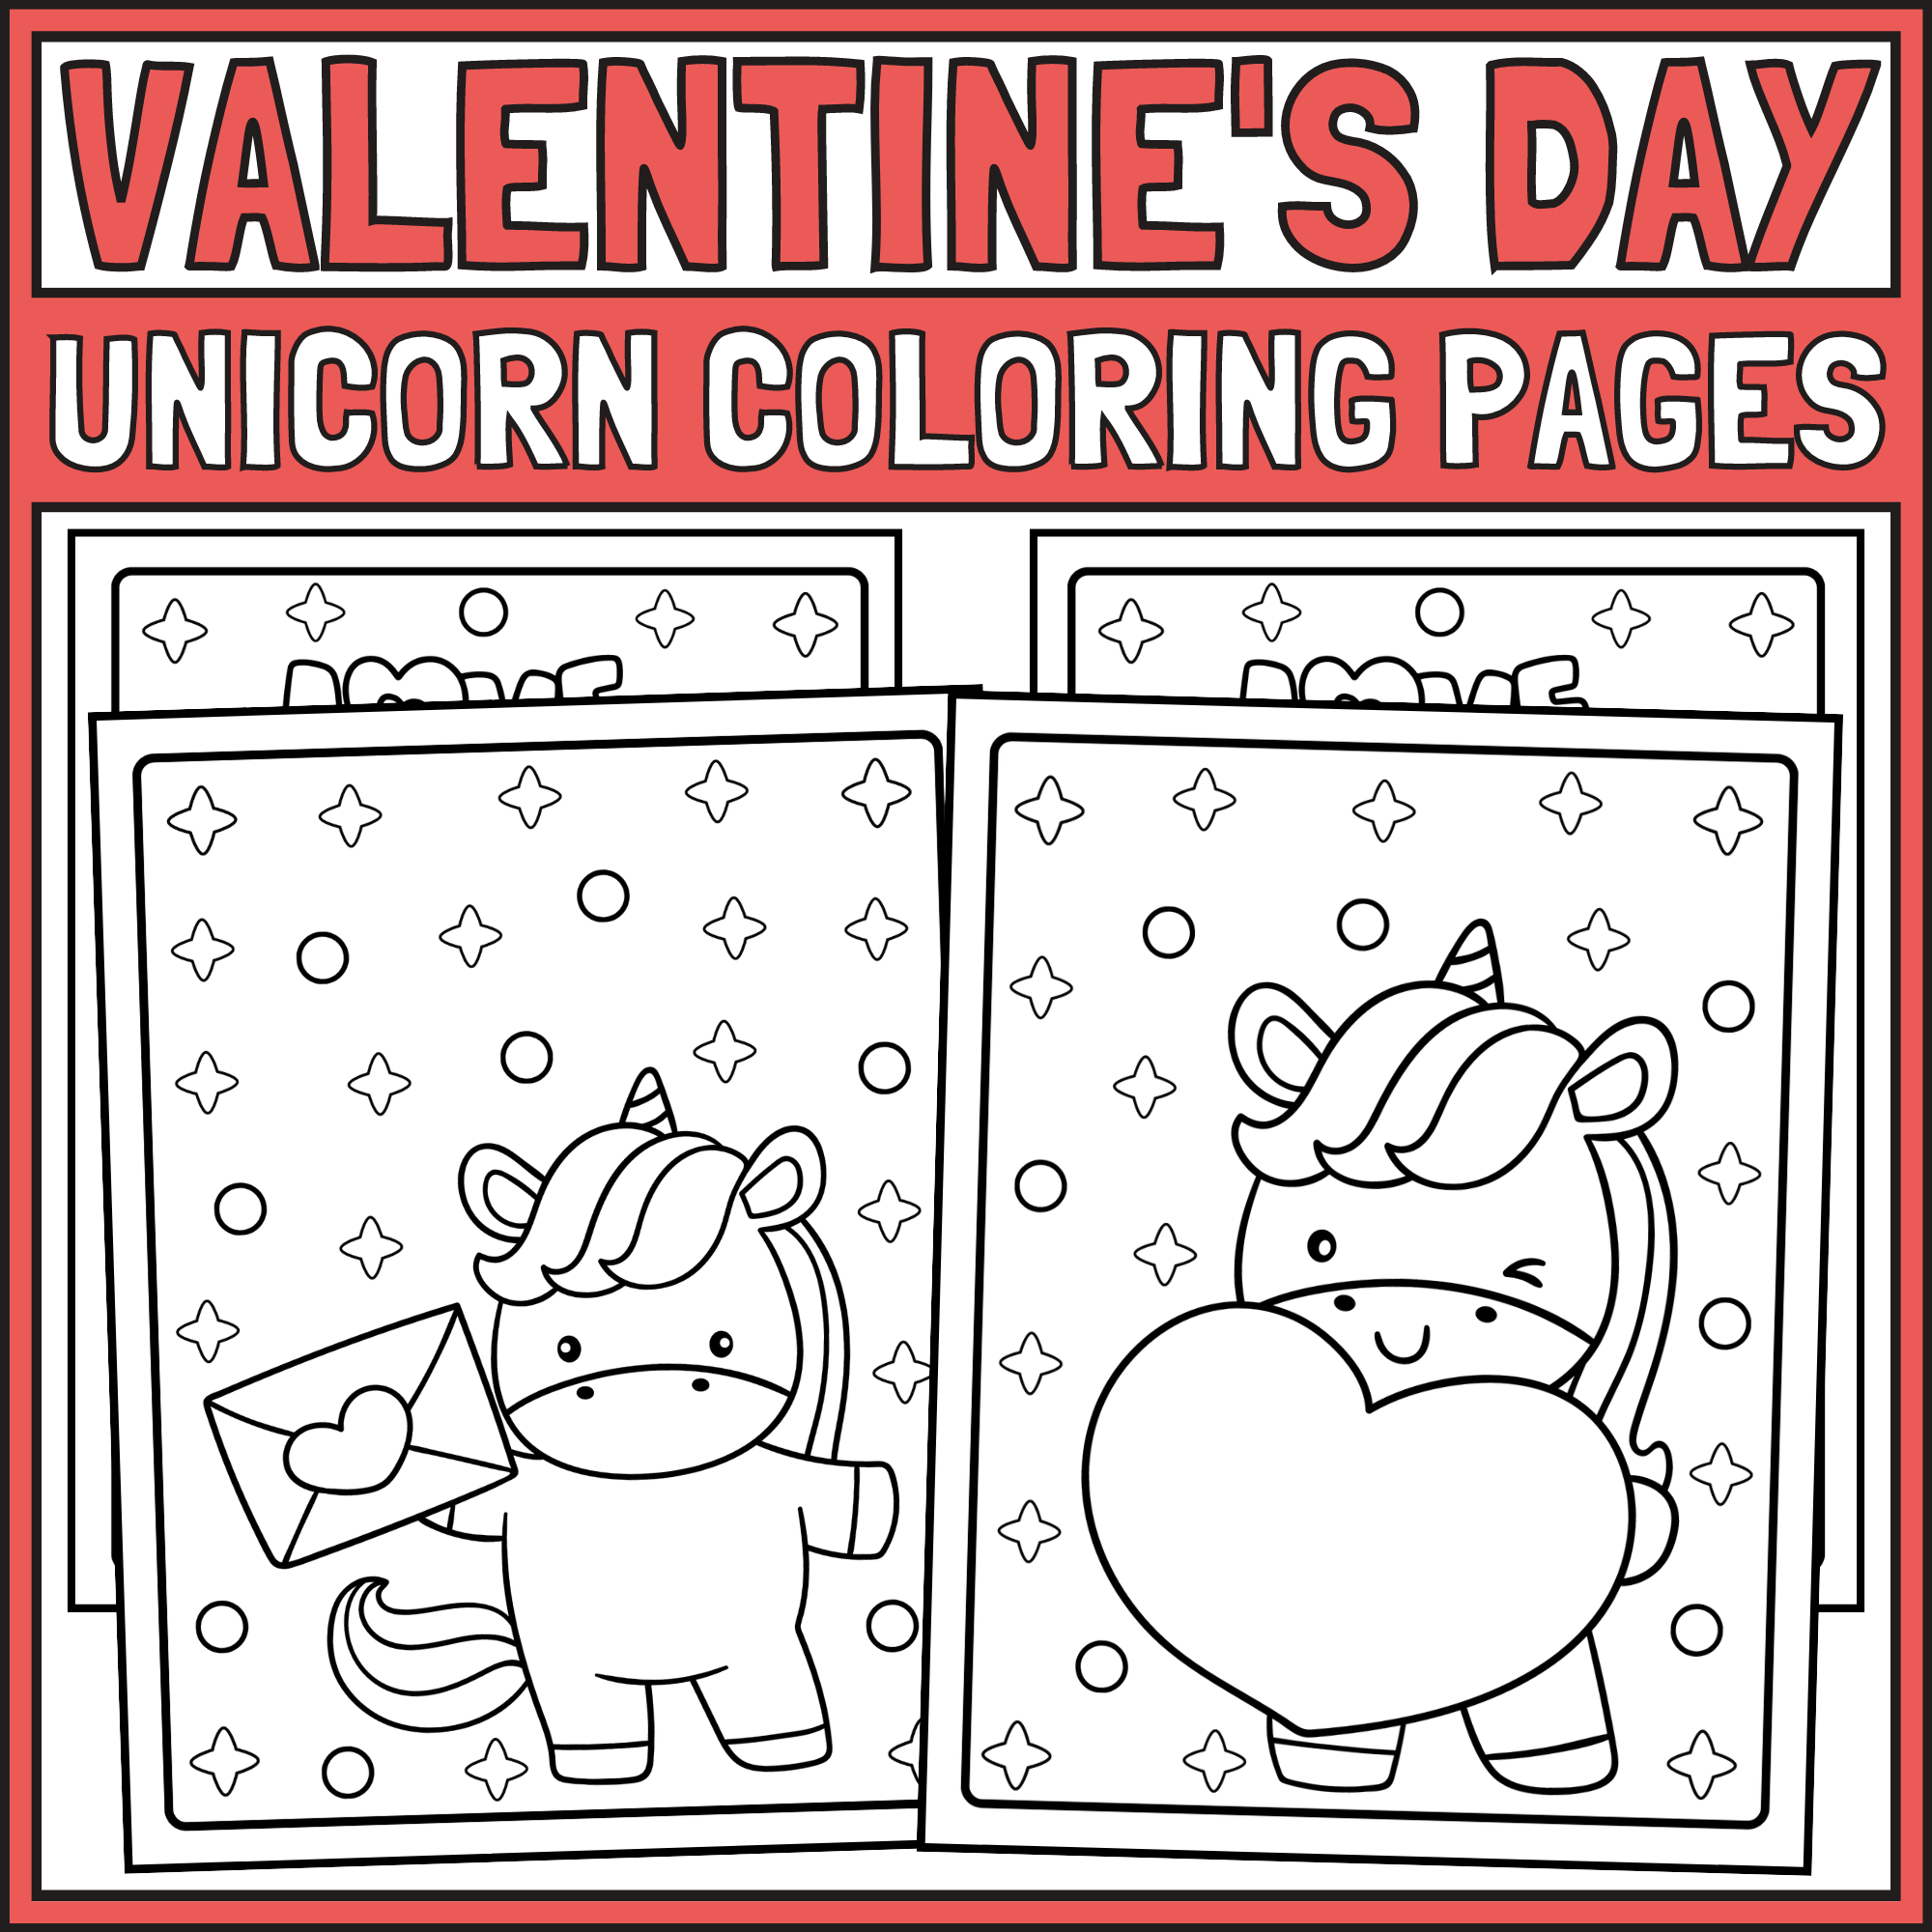 Valentine unicorn coloring pages valentines day coloring pages made by teachers